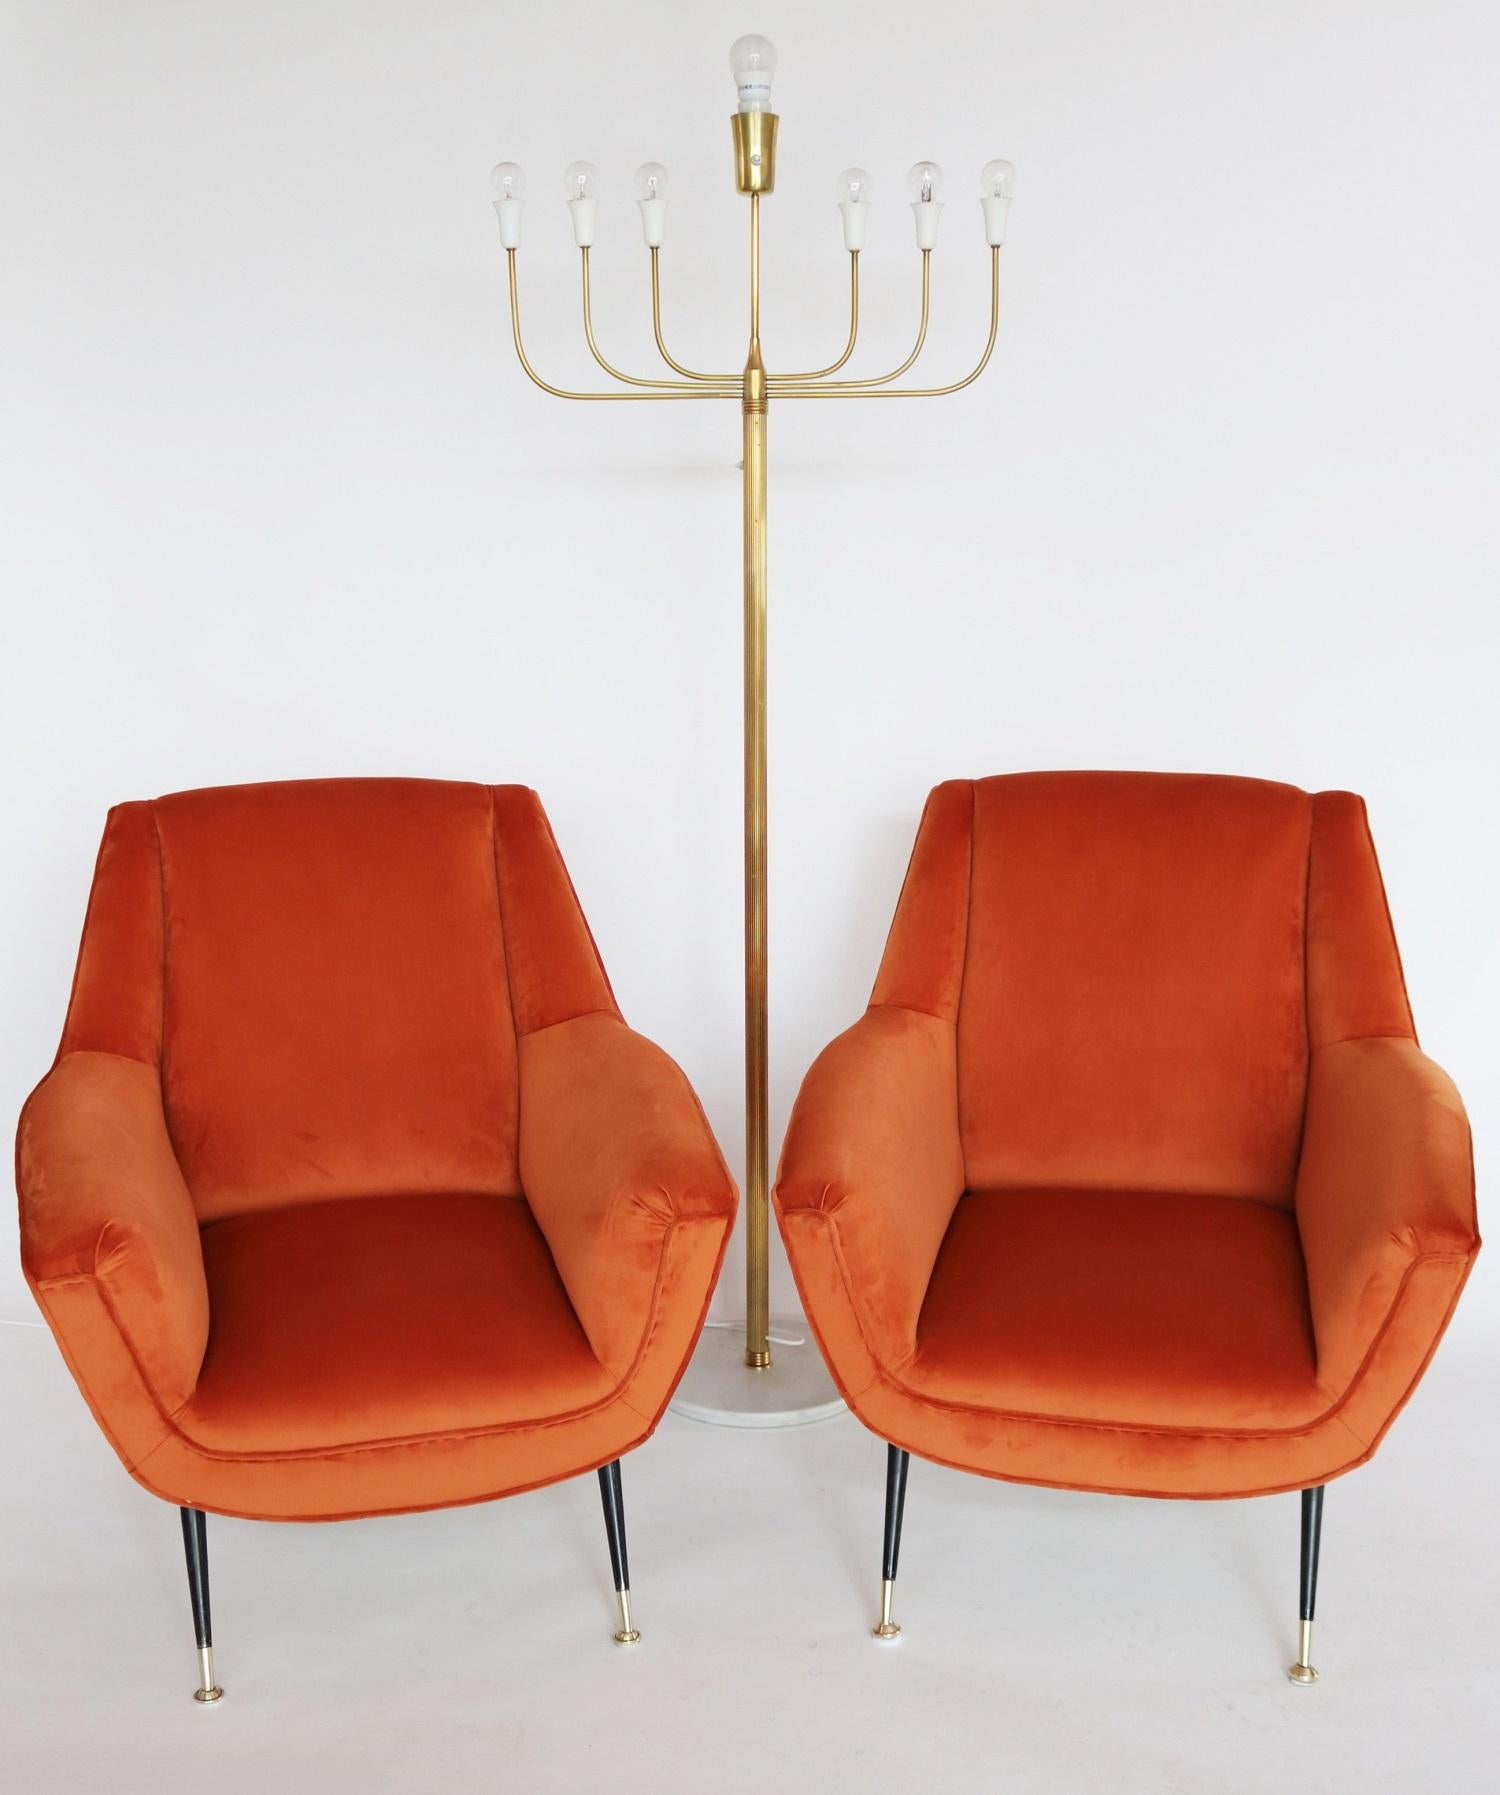 Gorgeous soft pair of two Italian original midcentury armchairs or lounge chairs from the 1950s with Stiletto feet and brass tips.
Completely restored internally with quality material and outside reupholstered with soft russet colored (rusty-red -